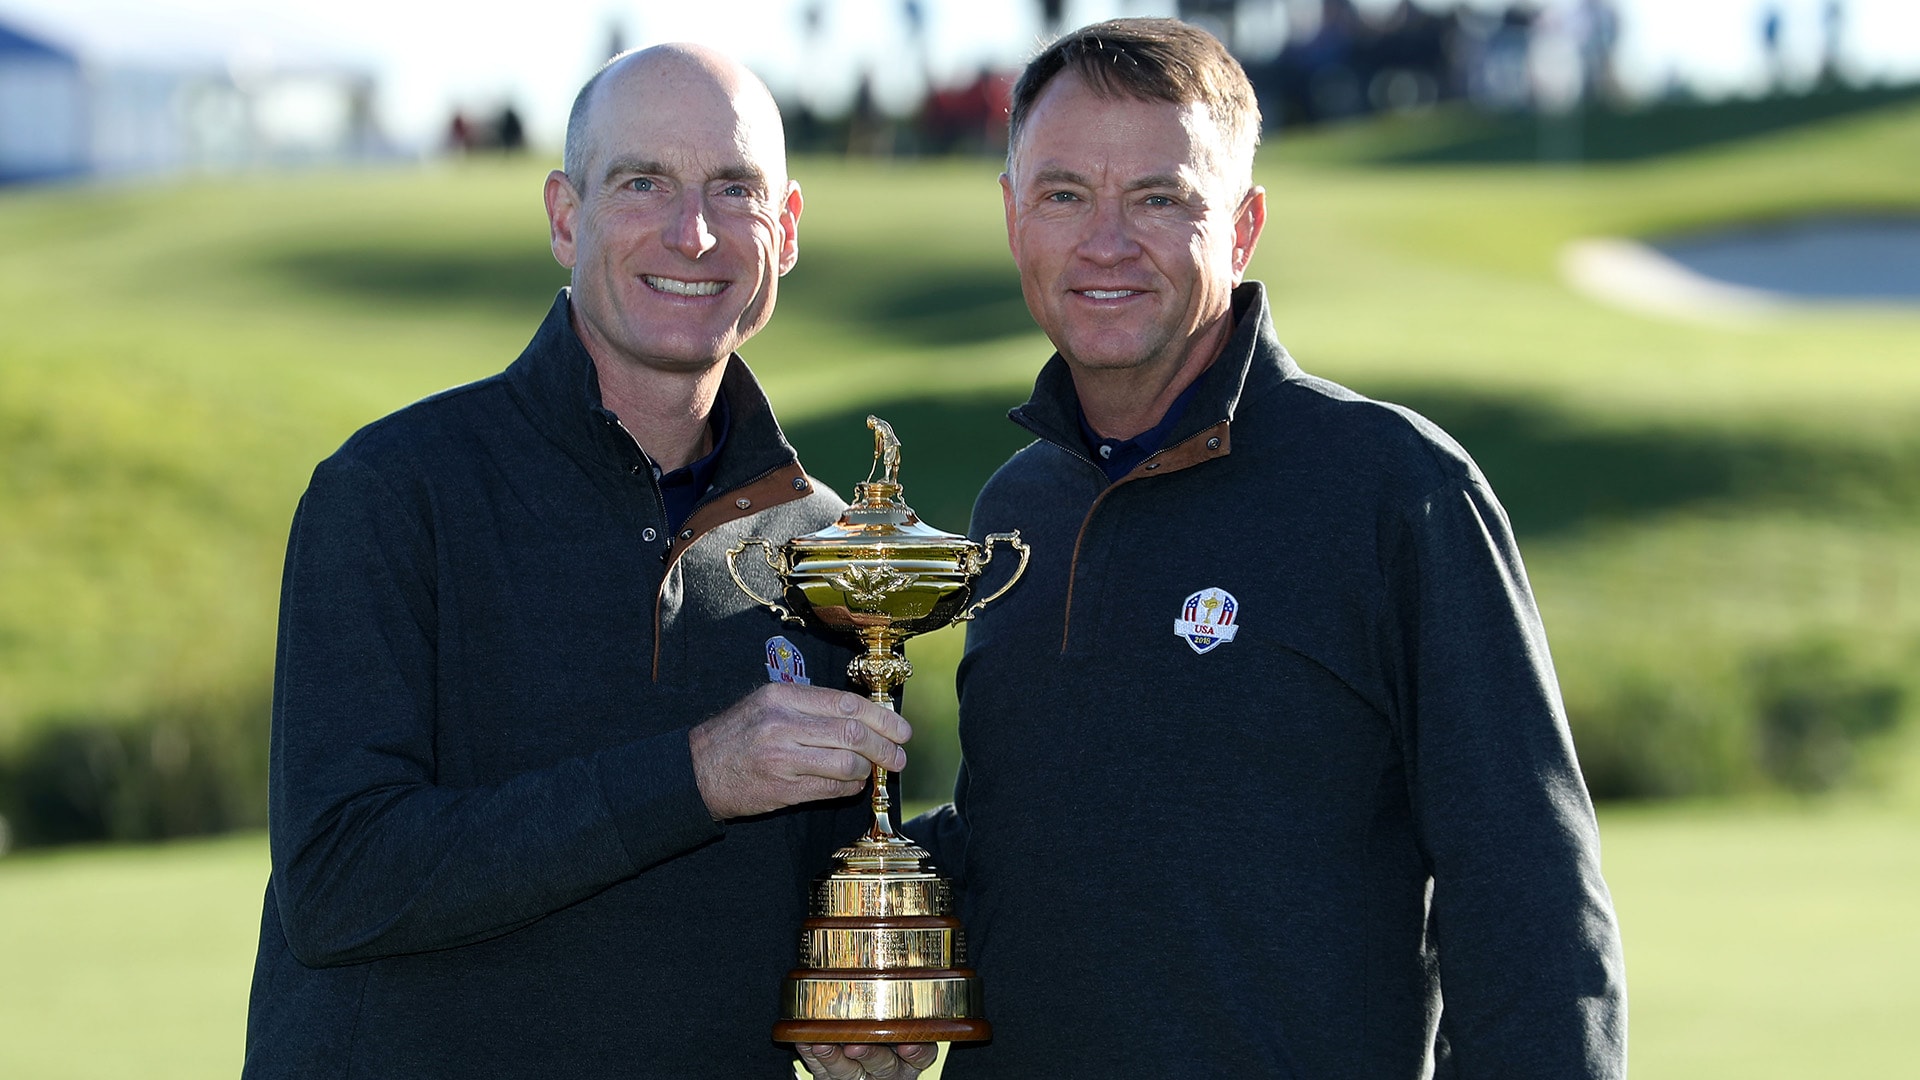 Past captains Jim Furyk and Davis Love III have trouble imagining a Ryder Cup without fans